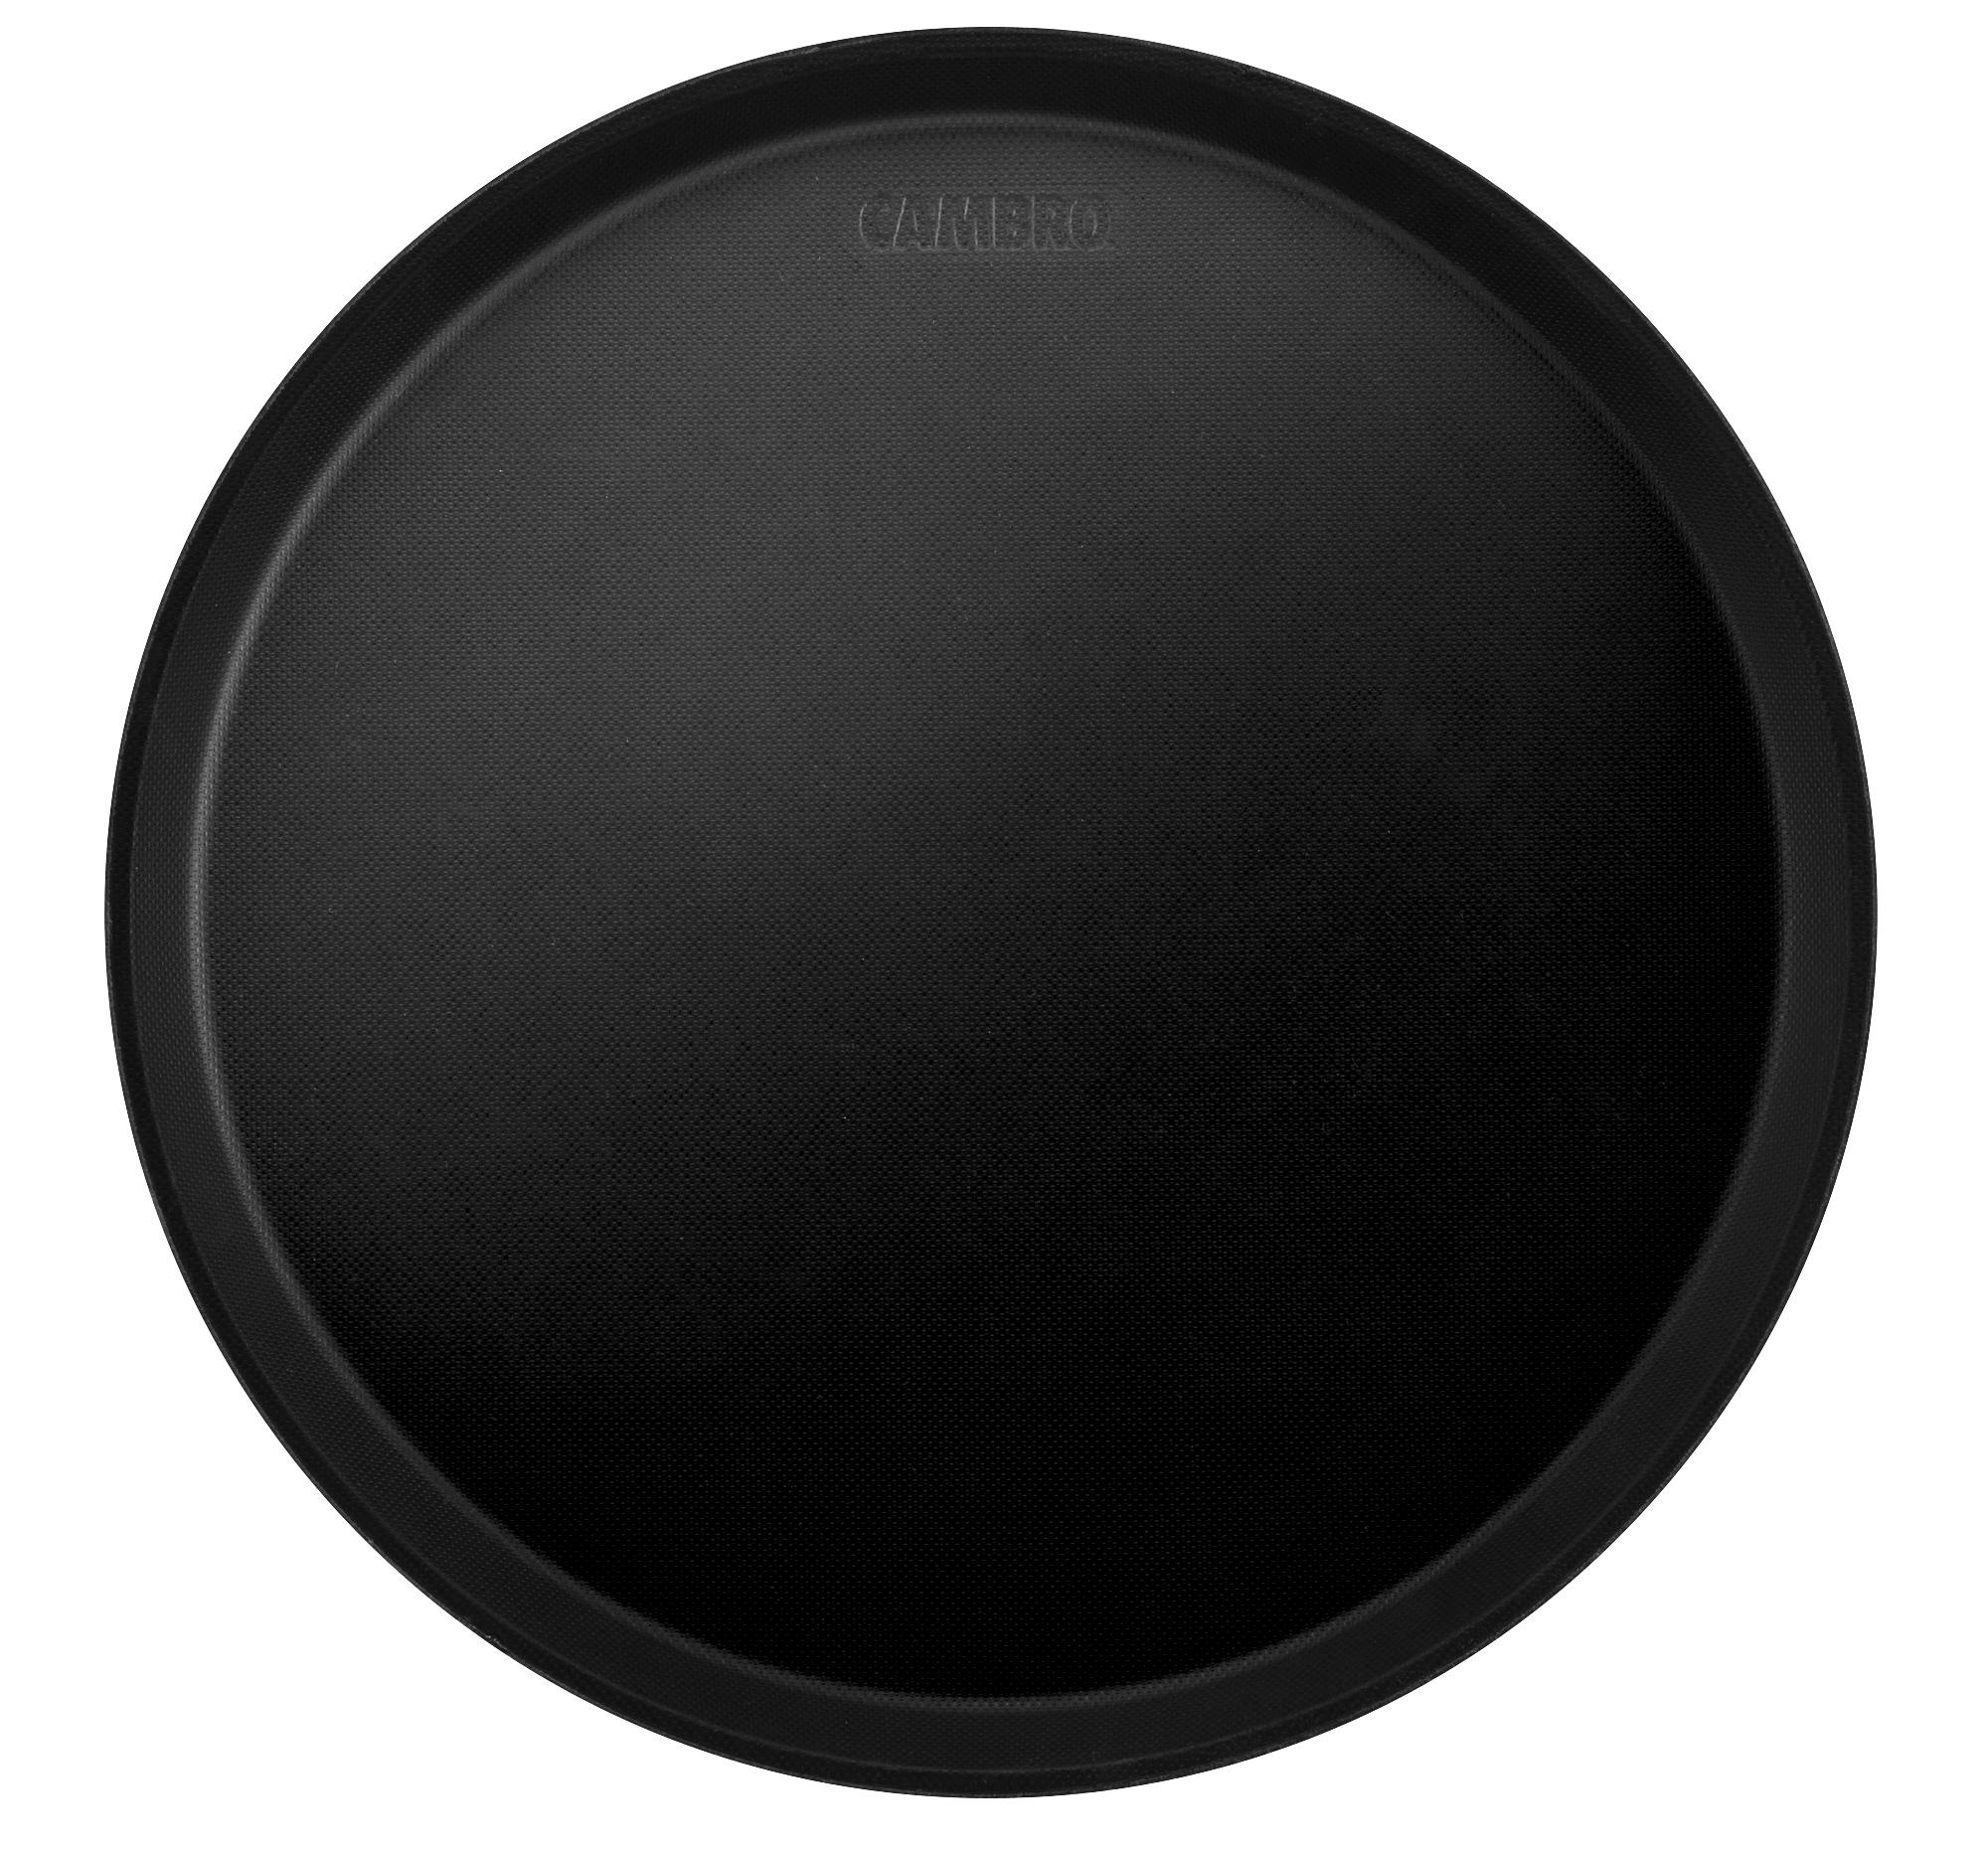 Camtread serving tray, round, non-slip surface, black, 355mm